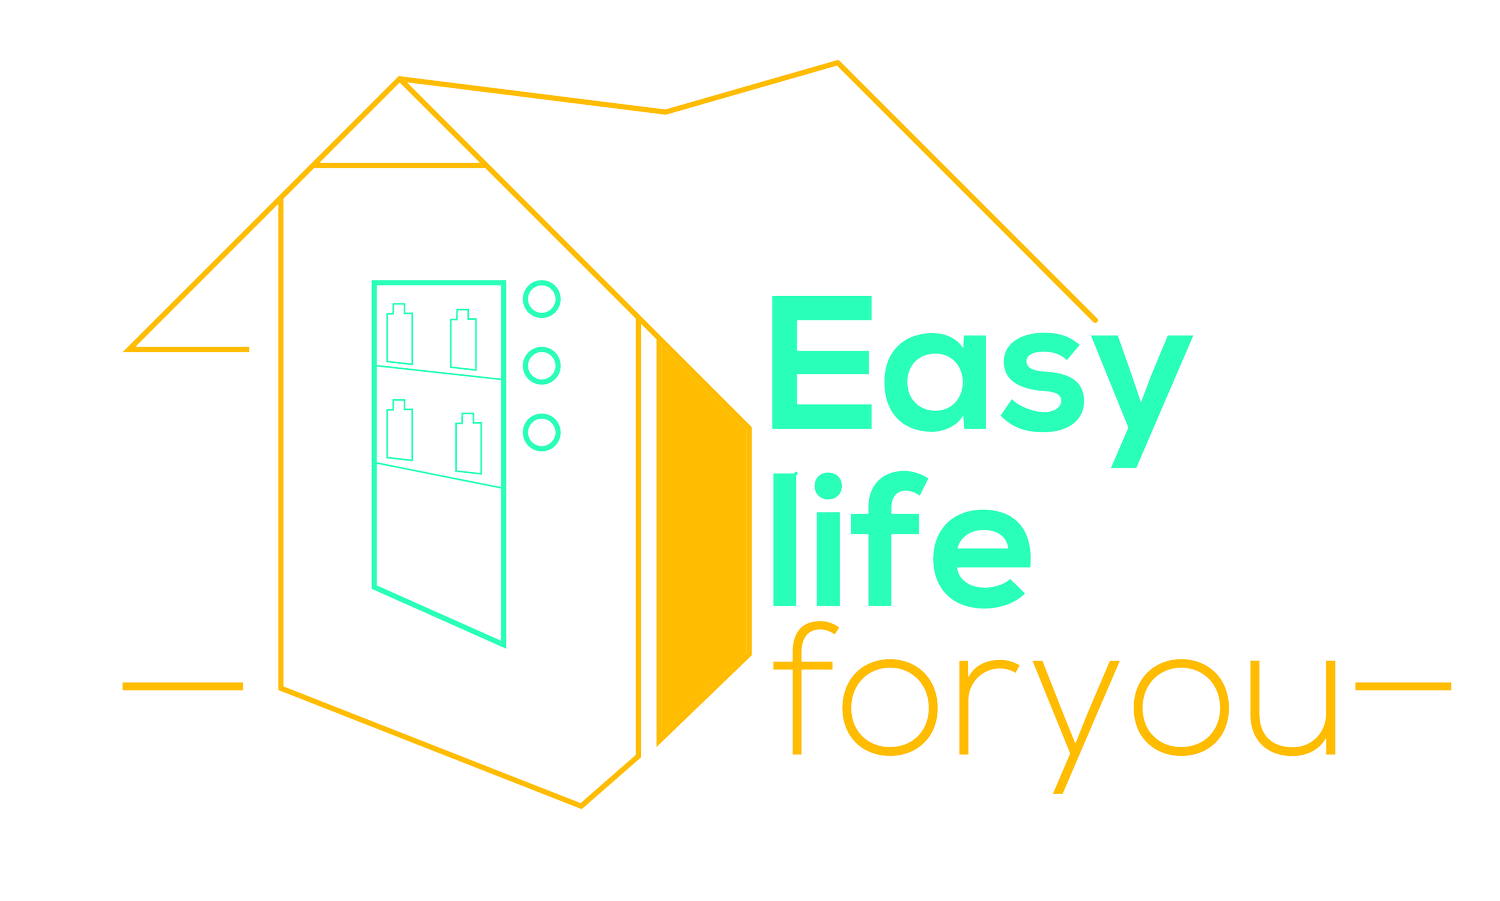 EASY LIFE FOR YOU